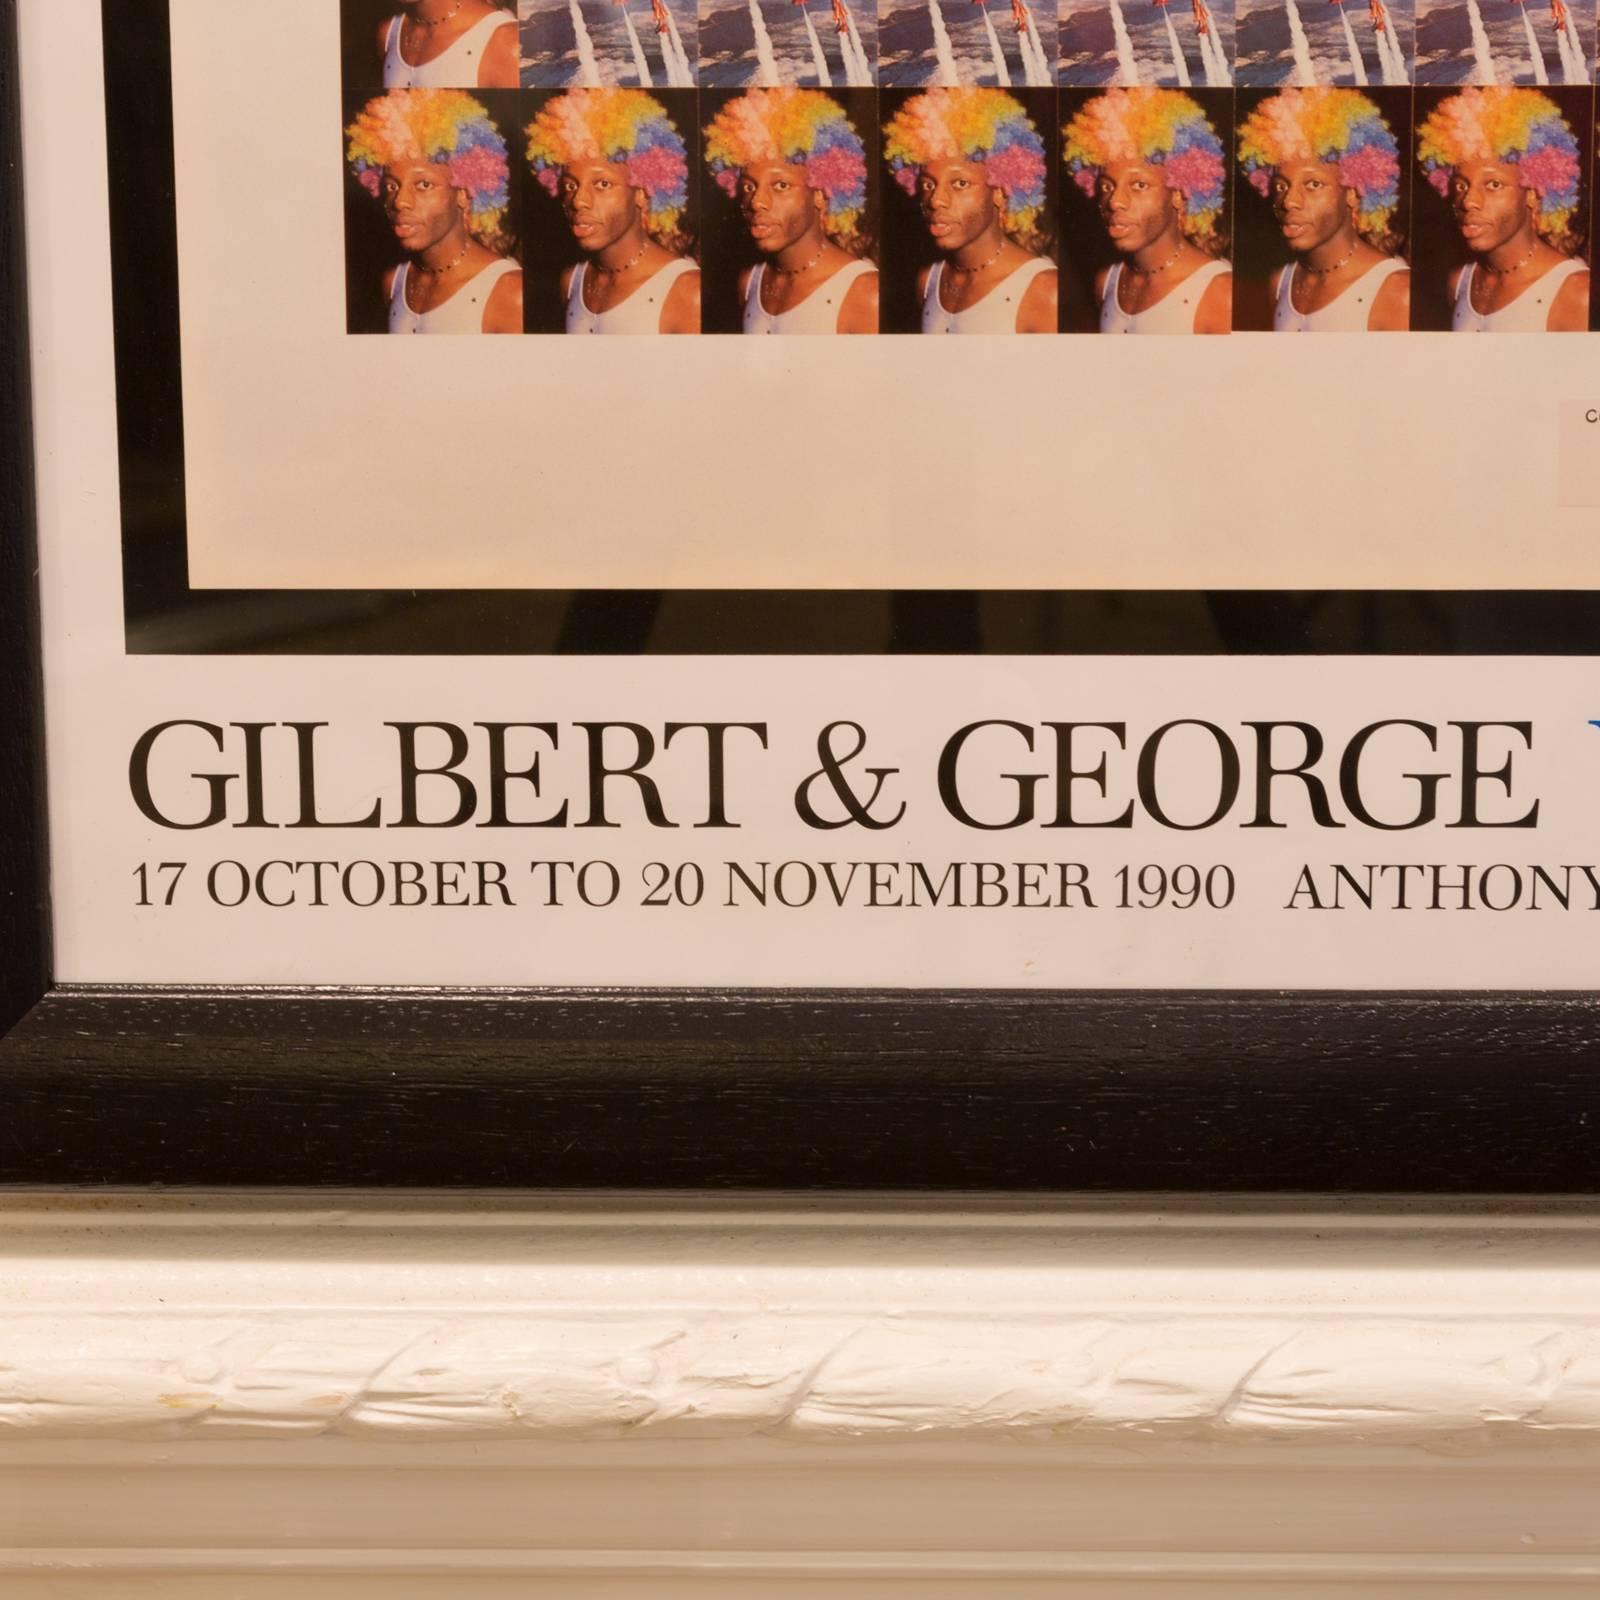 A framed exhibition poster depicting Gilbert and George's exhibit 'Worlds & Windows' at the Anthony d'Offay Gallery, Dering Street, London.